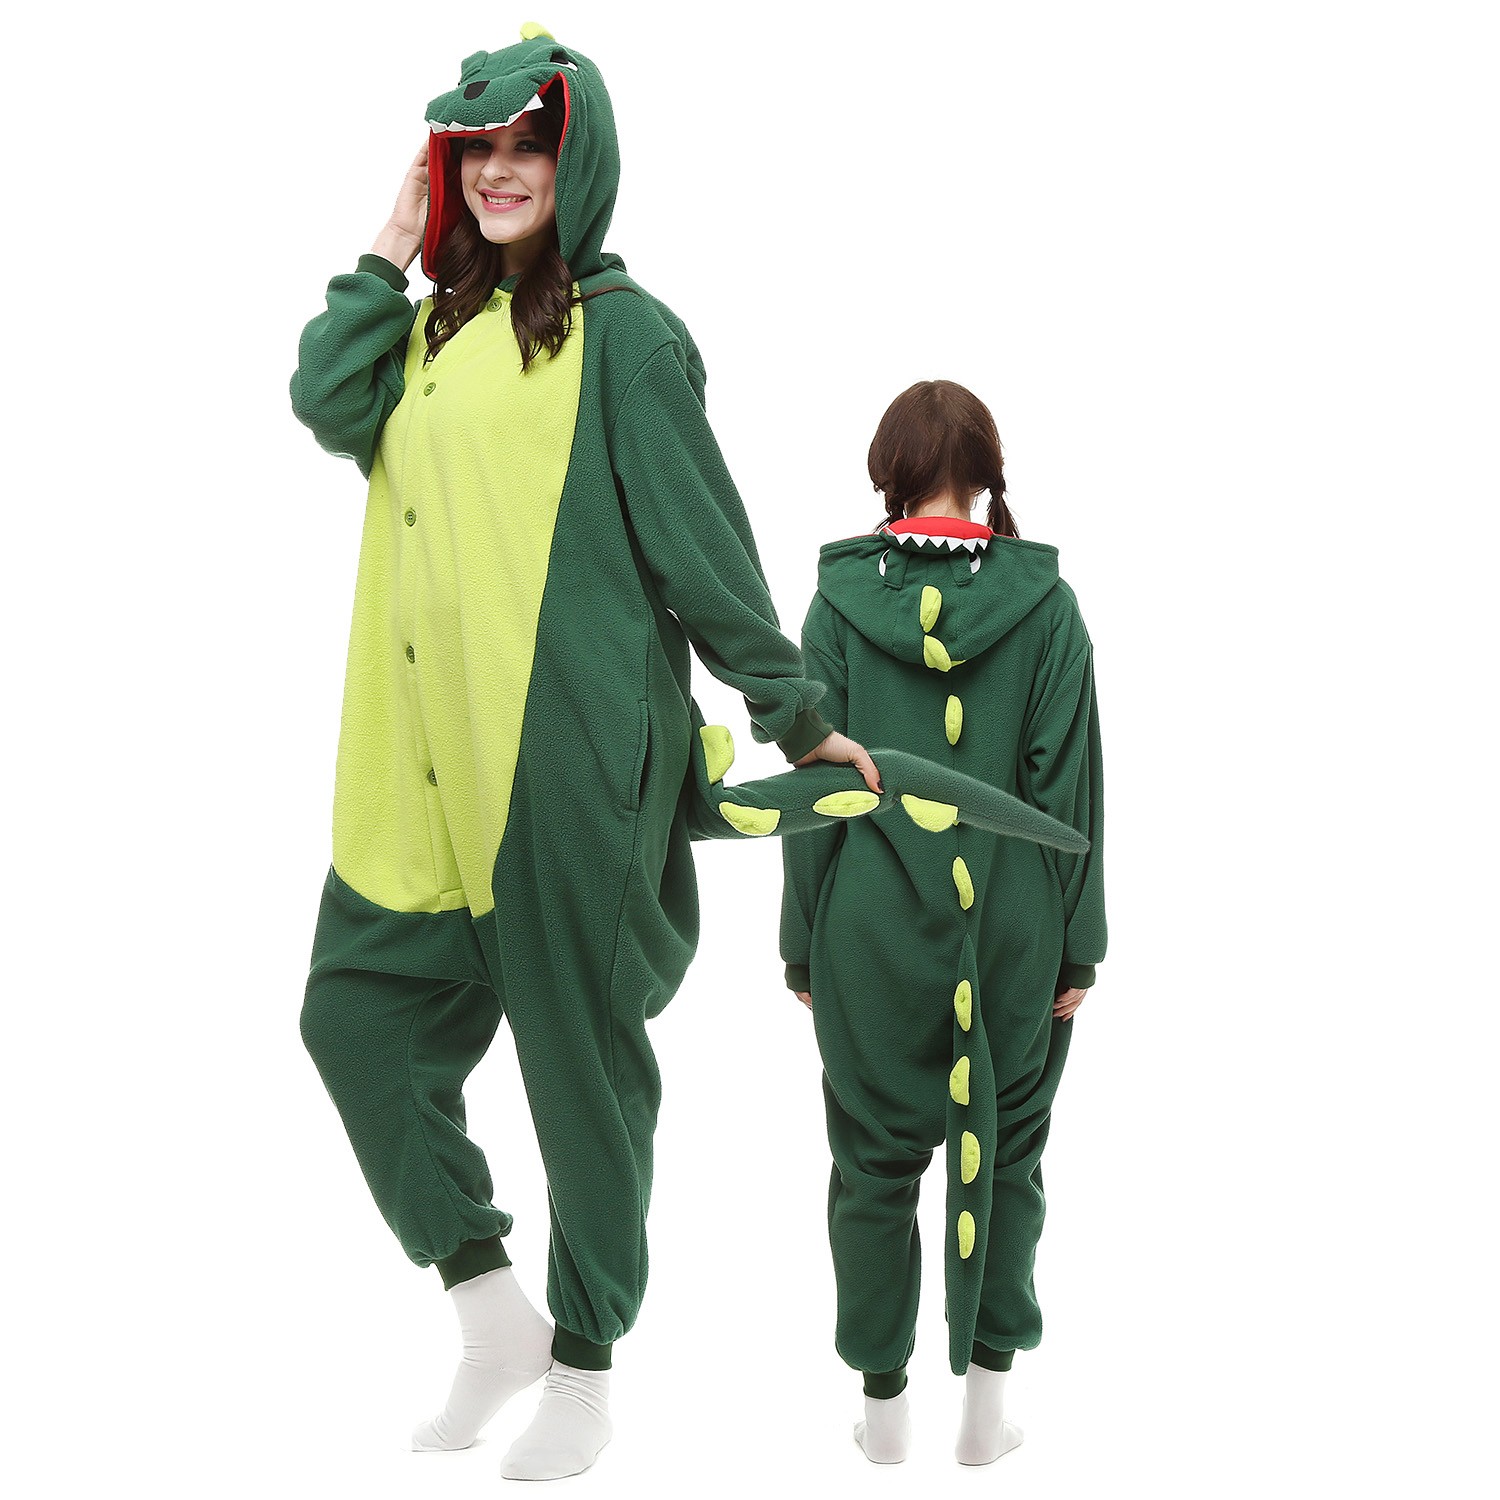 YULOONG Adult Dinosaur Onesies Pajamas Halloween Christmas Party Cosplay Costume Fancy Dress for Women Man 